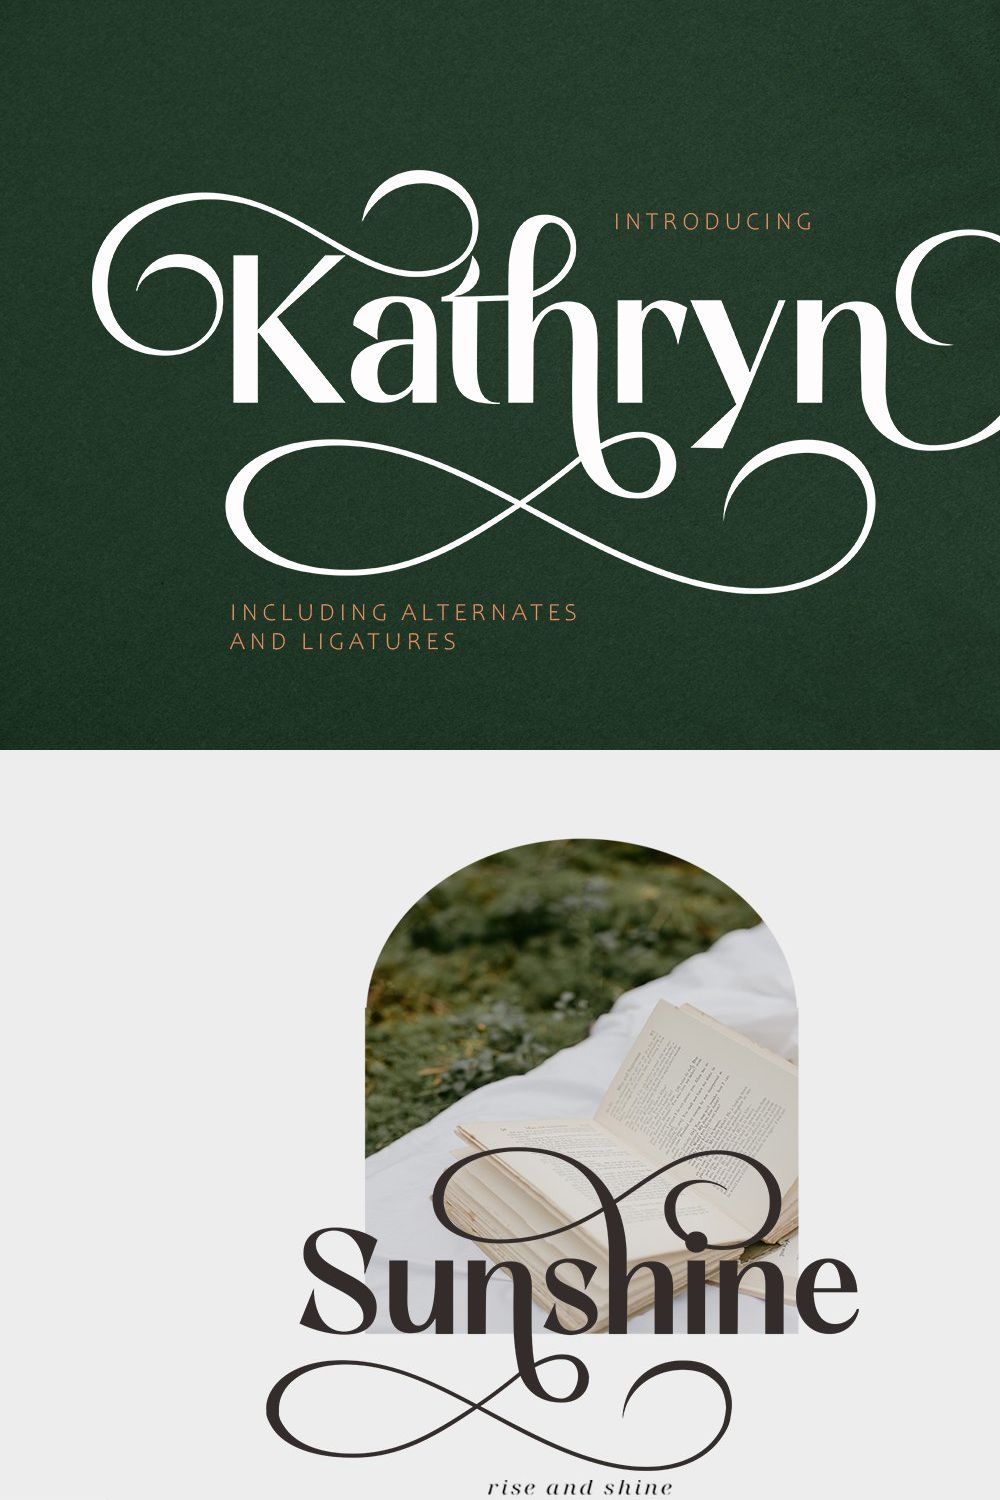 Kathryn pinterest preview image.